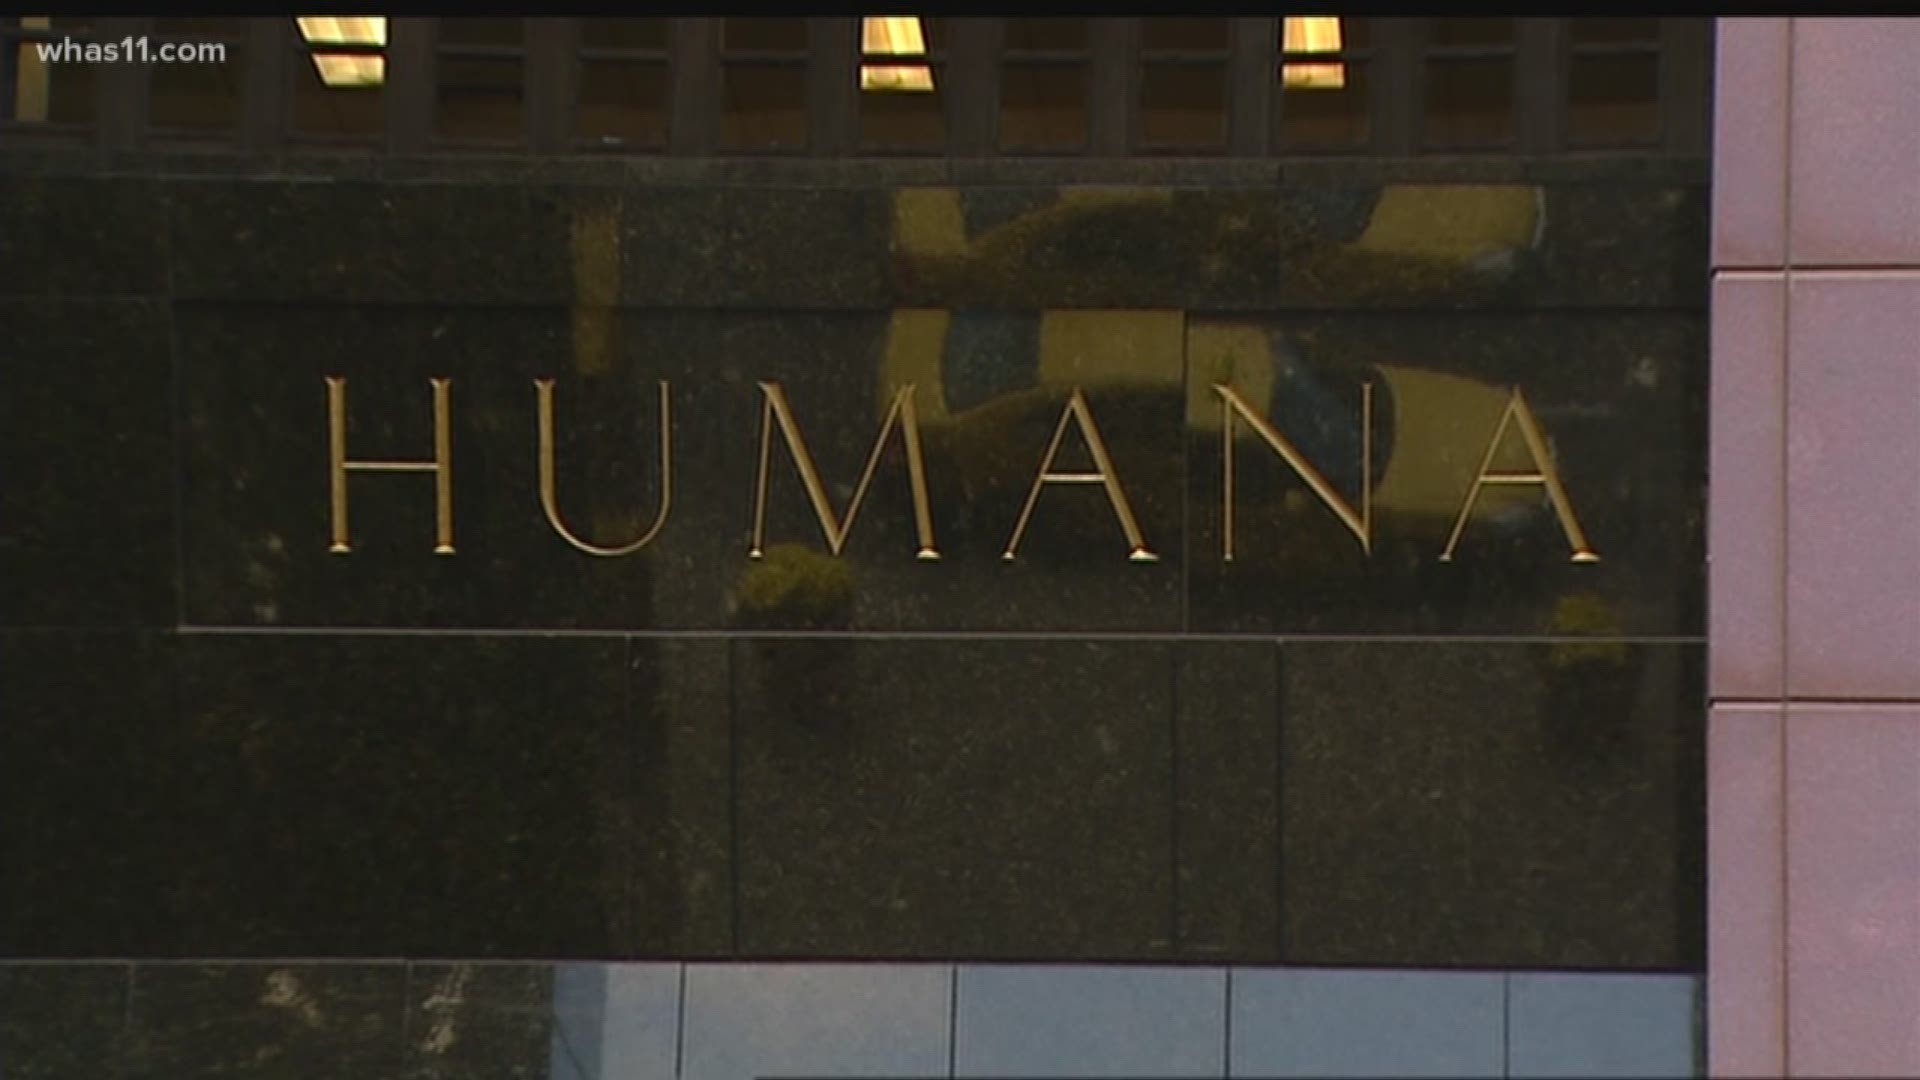 Humana to pay $2.5 million in back wages